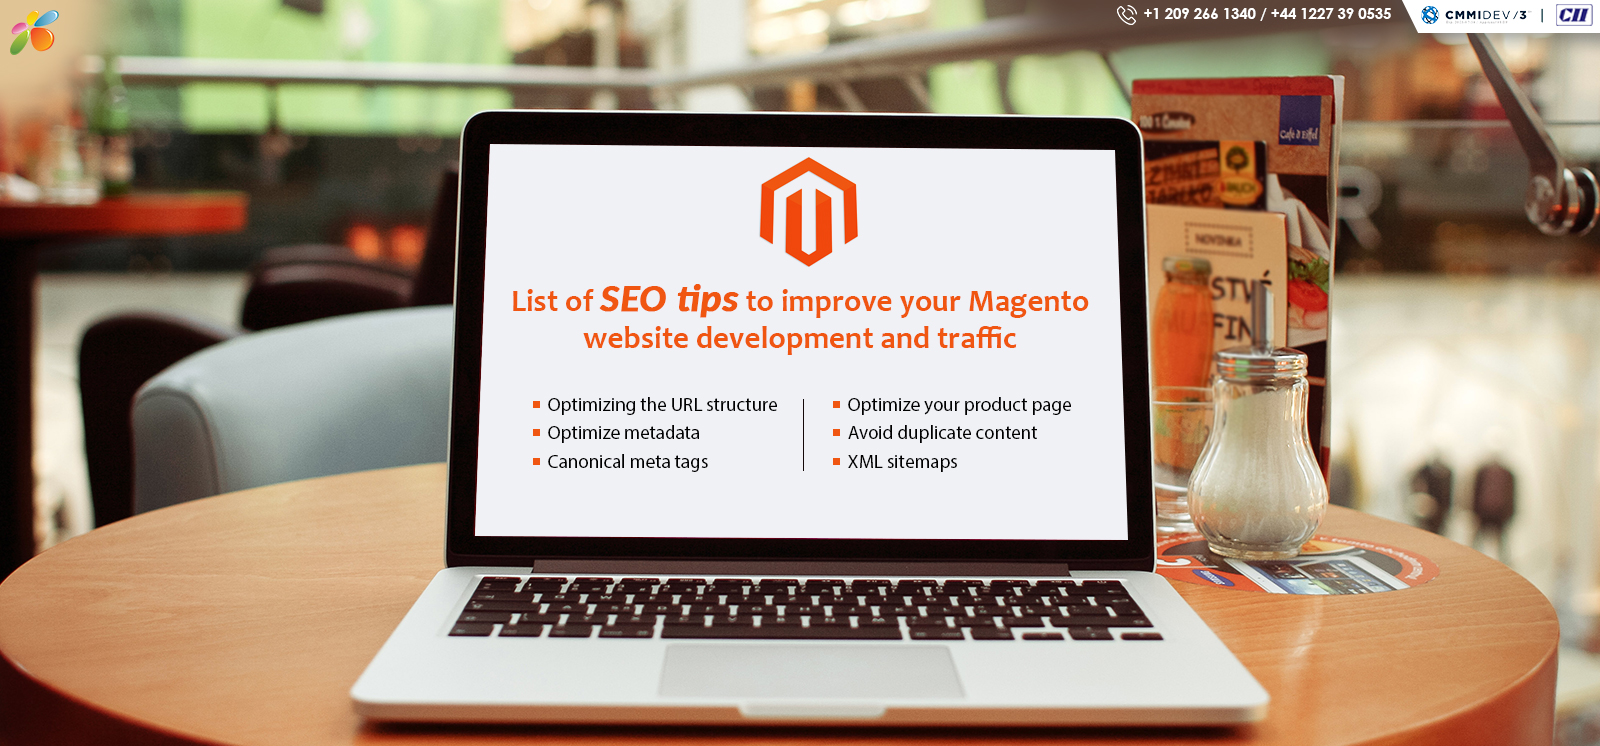 List of SEO tips to improve your Magento website development and traffic